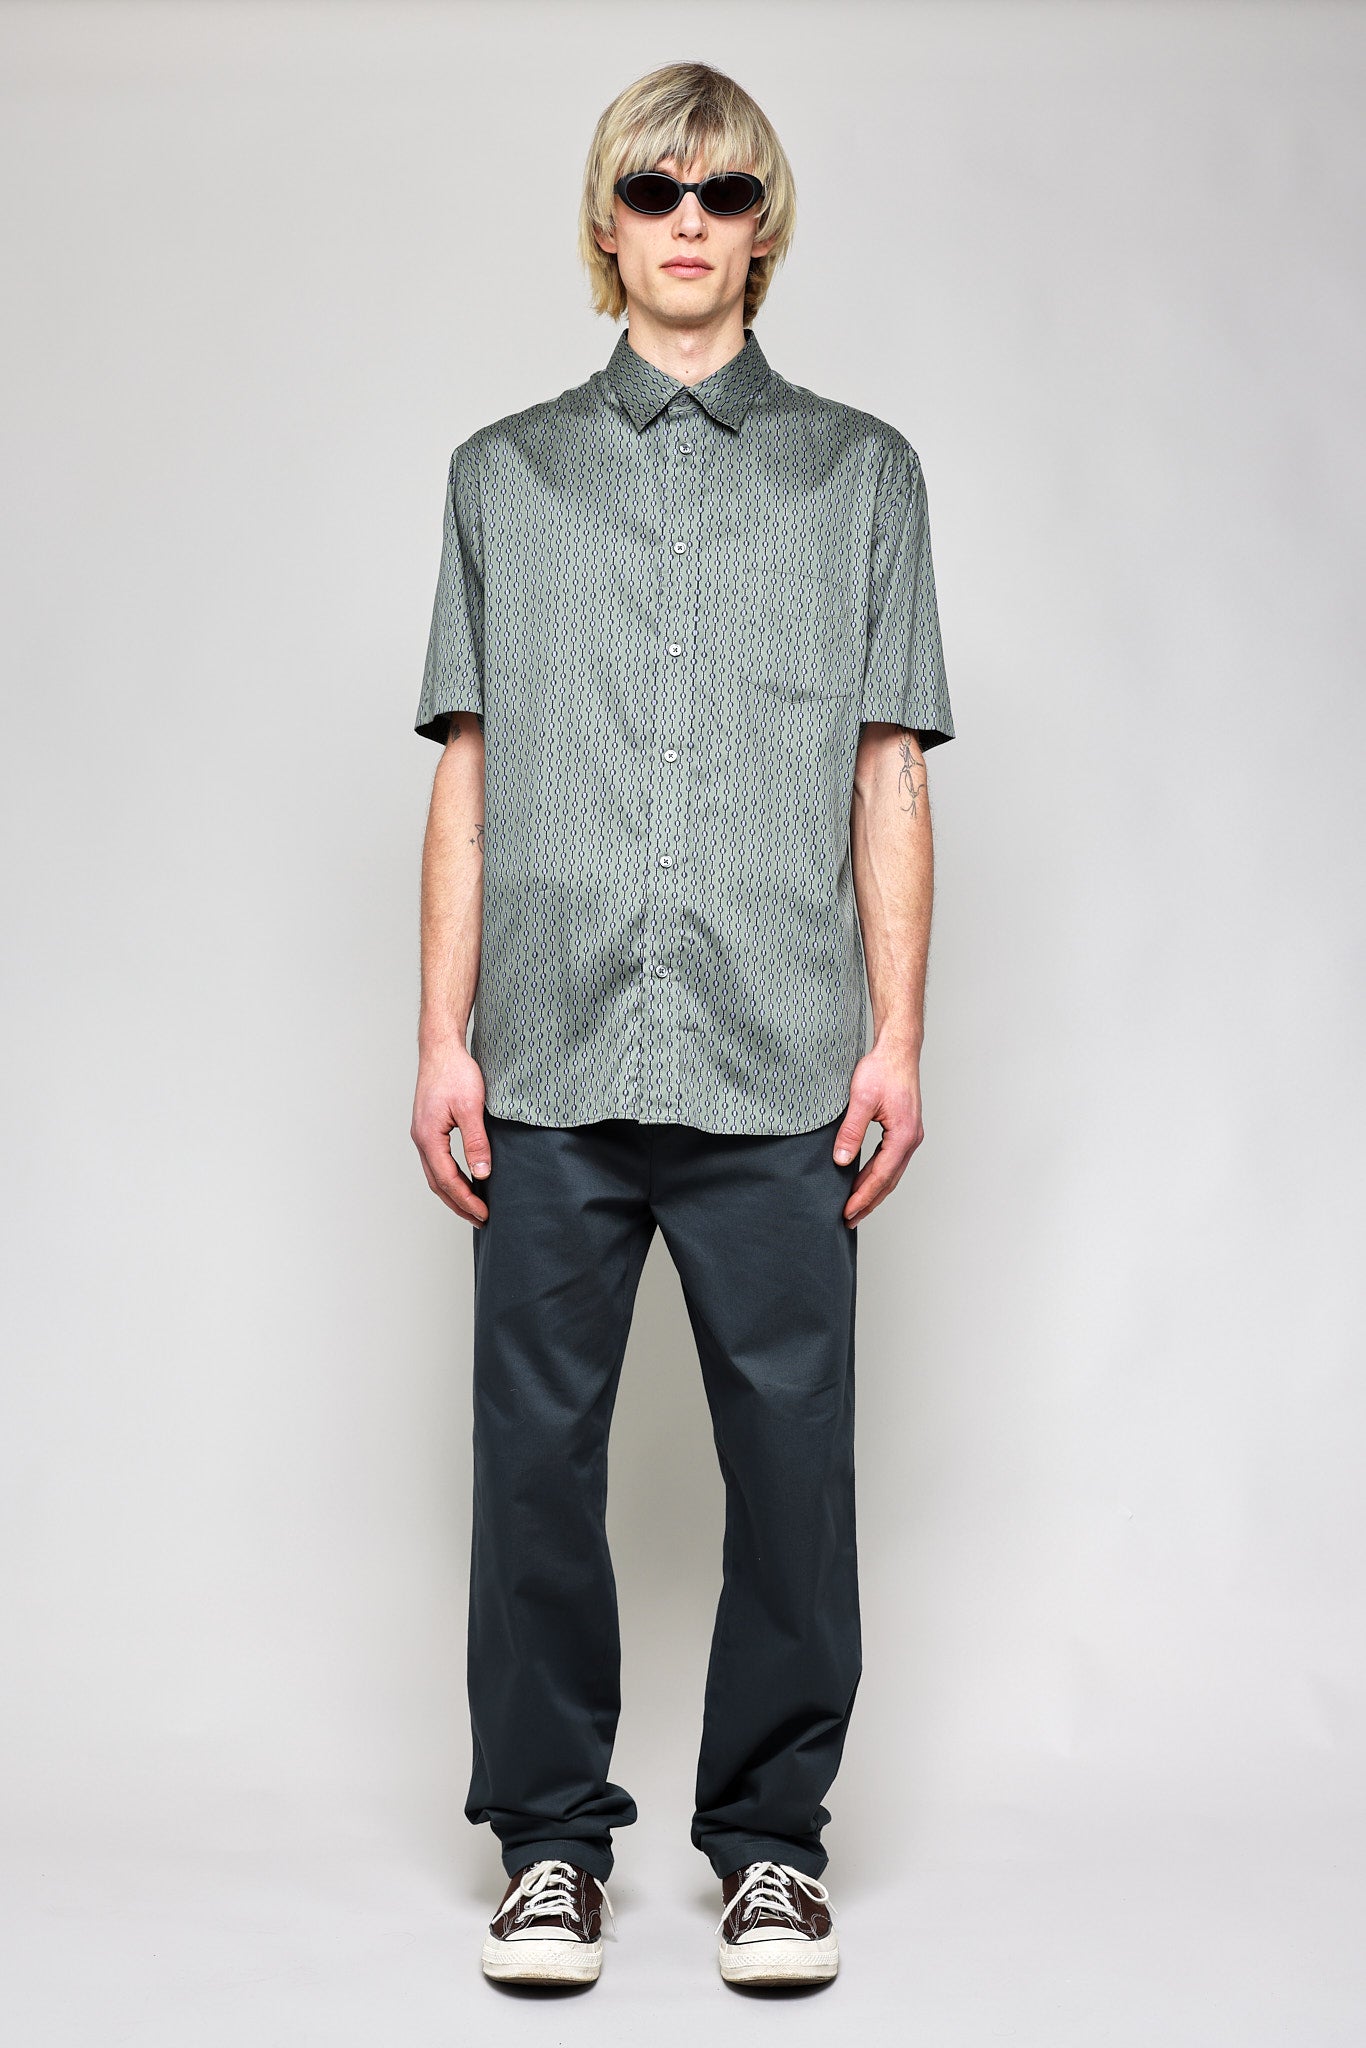 Japanese Dotted Stripe Print in Green 05